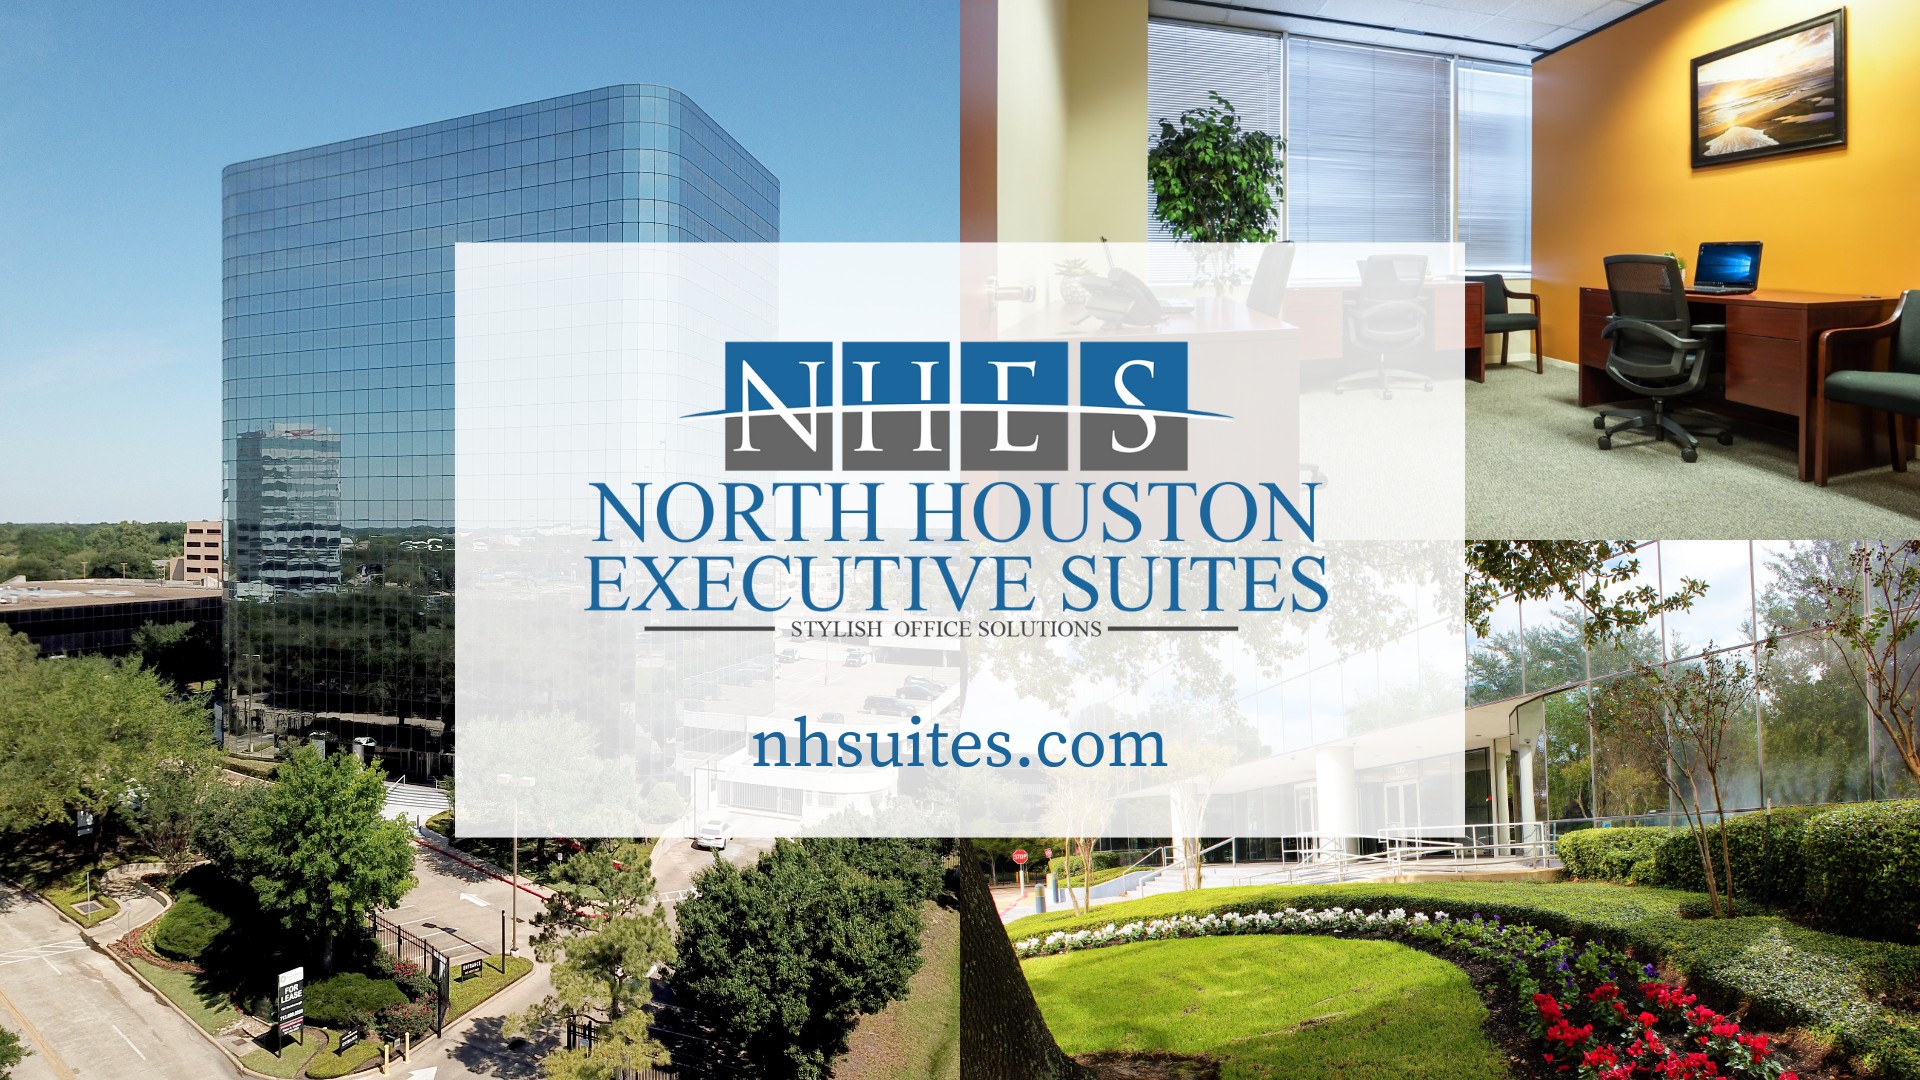 Rent Modern Executive Suites With 24/7 Access To Grow Your Business | Humble, TX